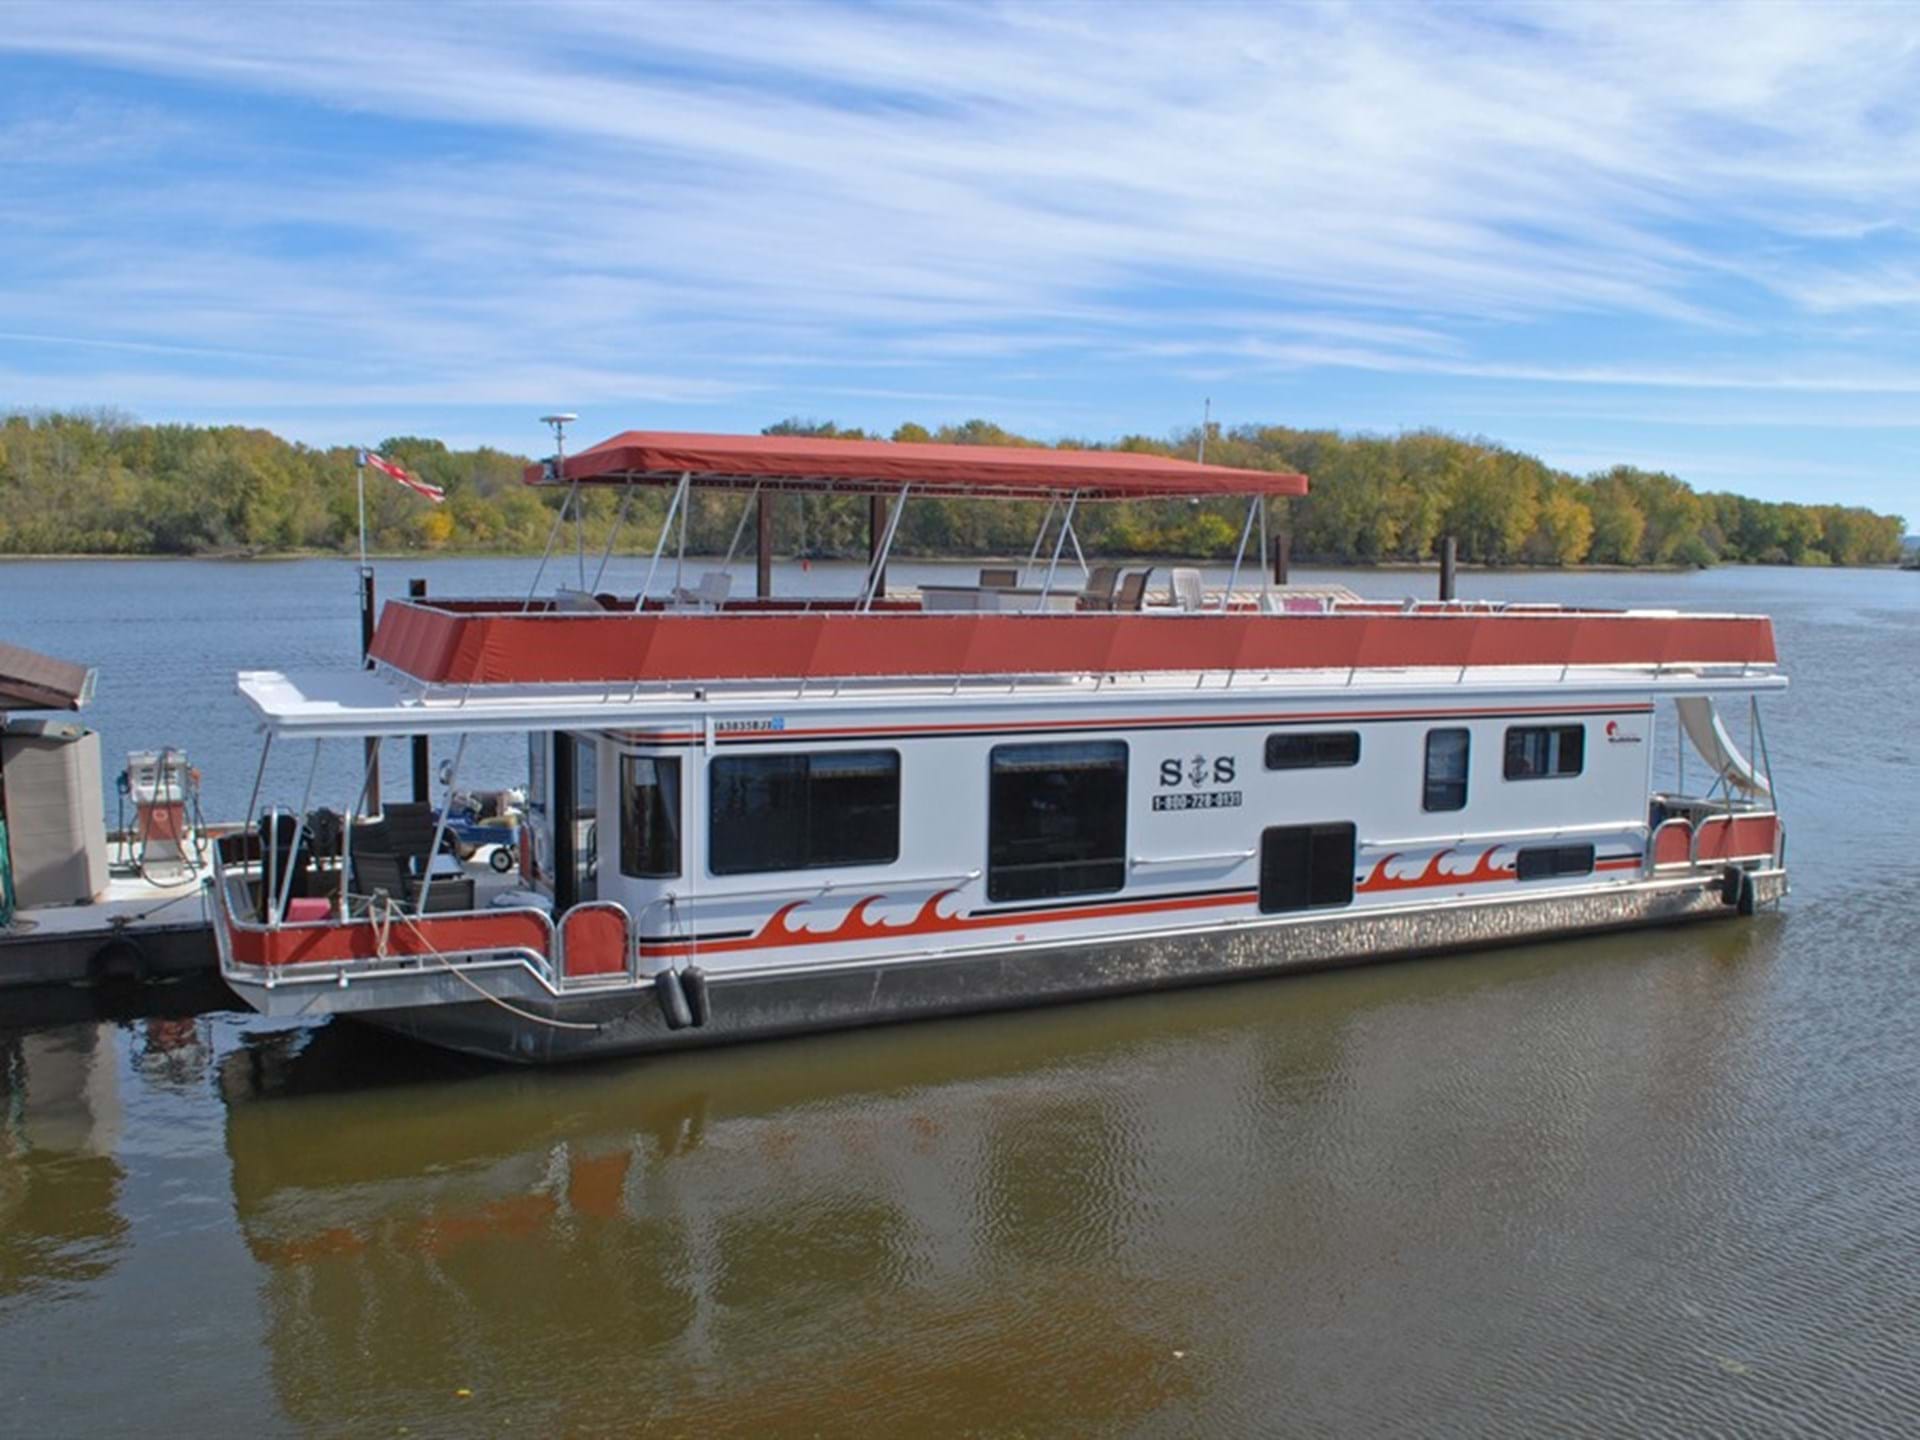 An S&S Houseboat on the Mississippi!